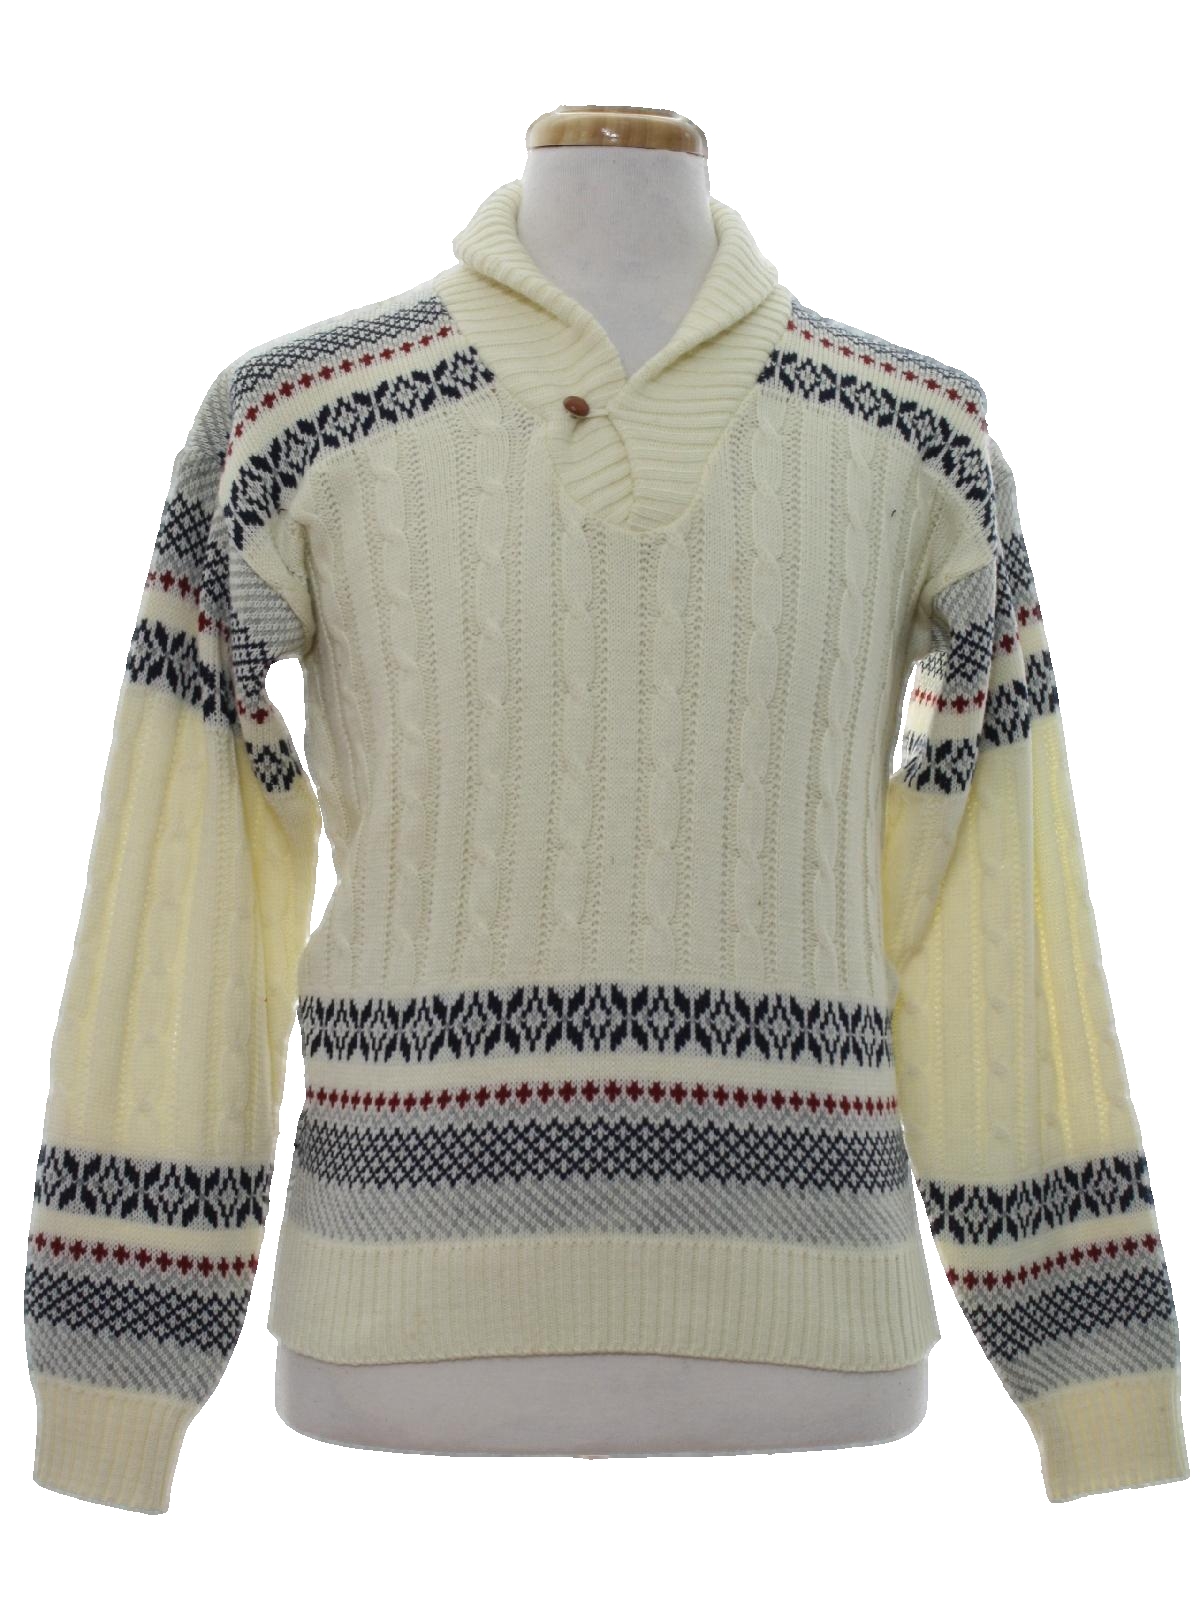 70s Sweater (JCPenney): 80s -JCPenney- Mens creamy ivory acrylic knit sweater with slight veed 